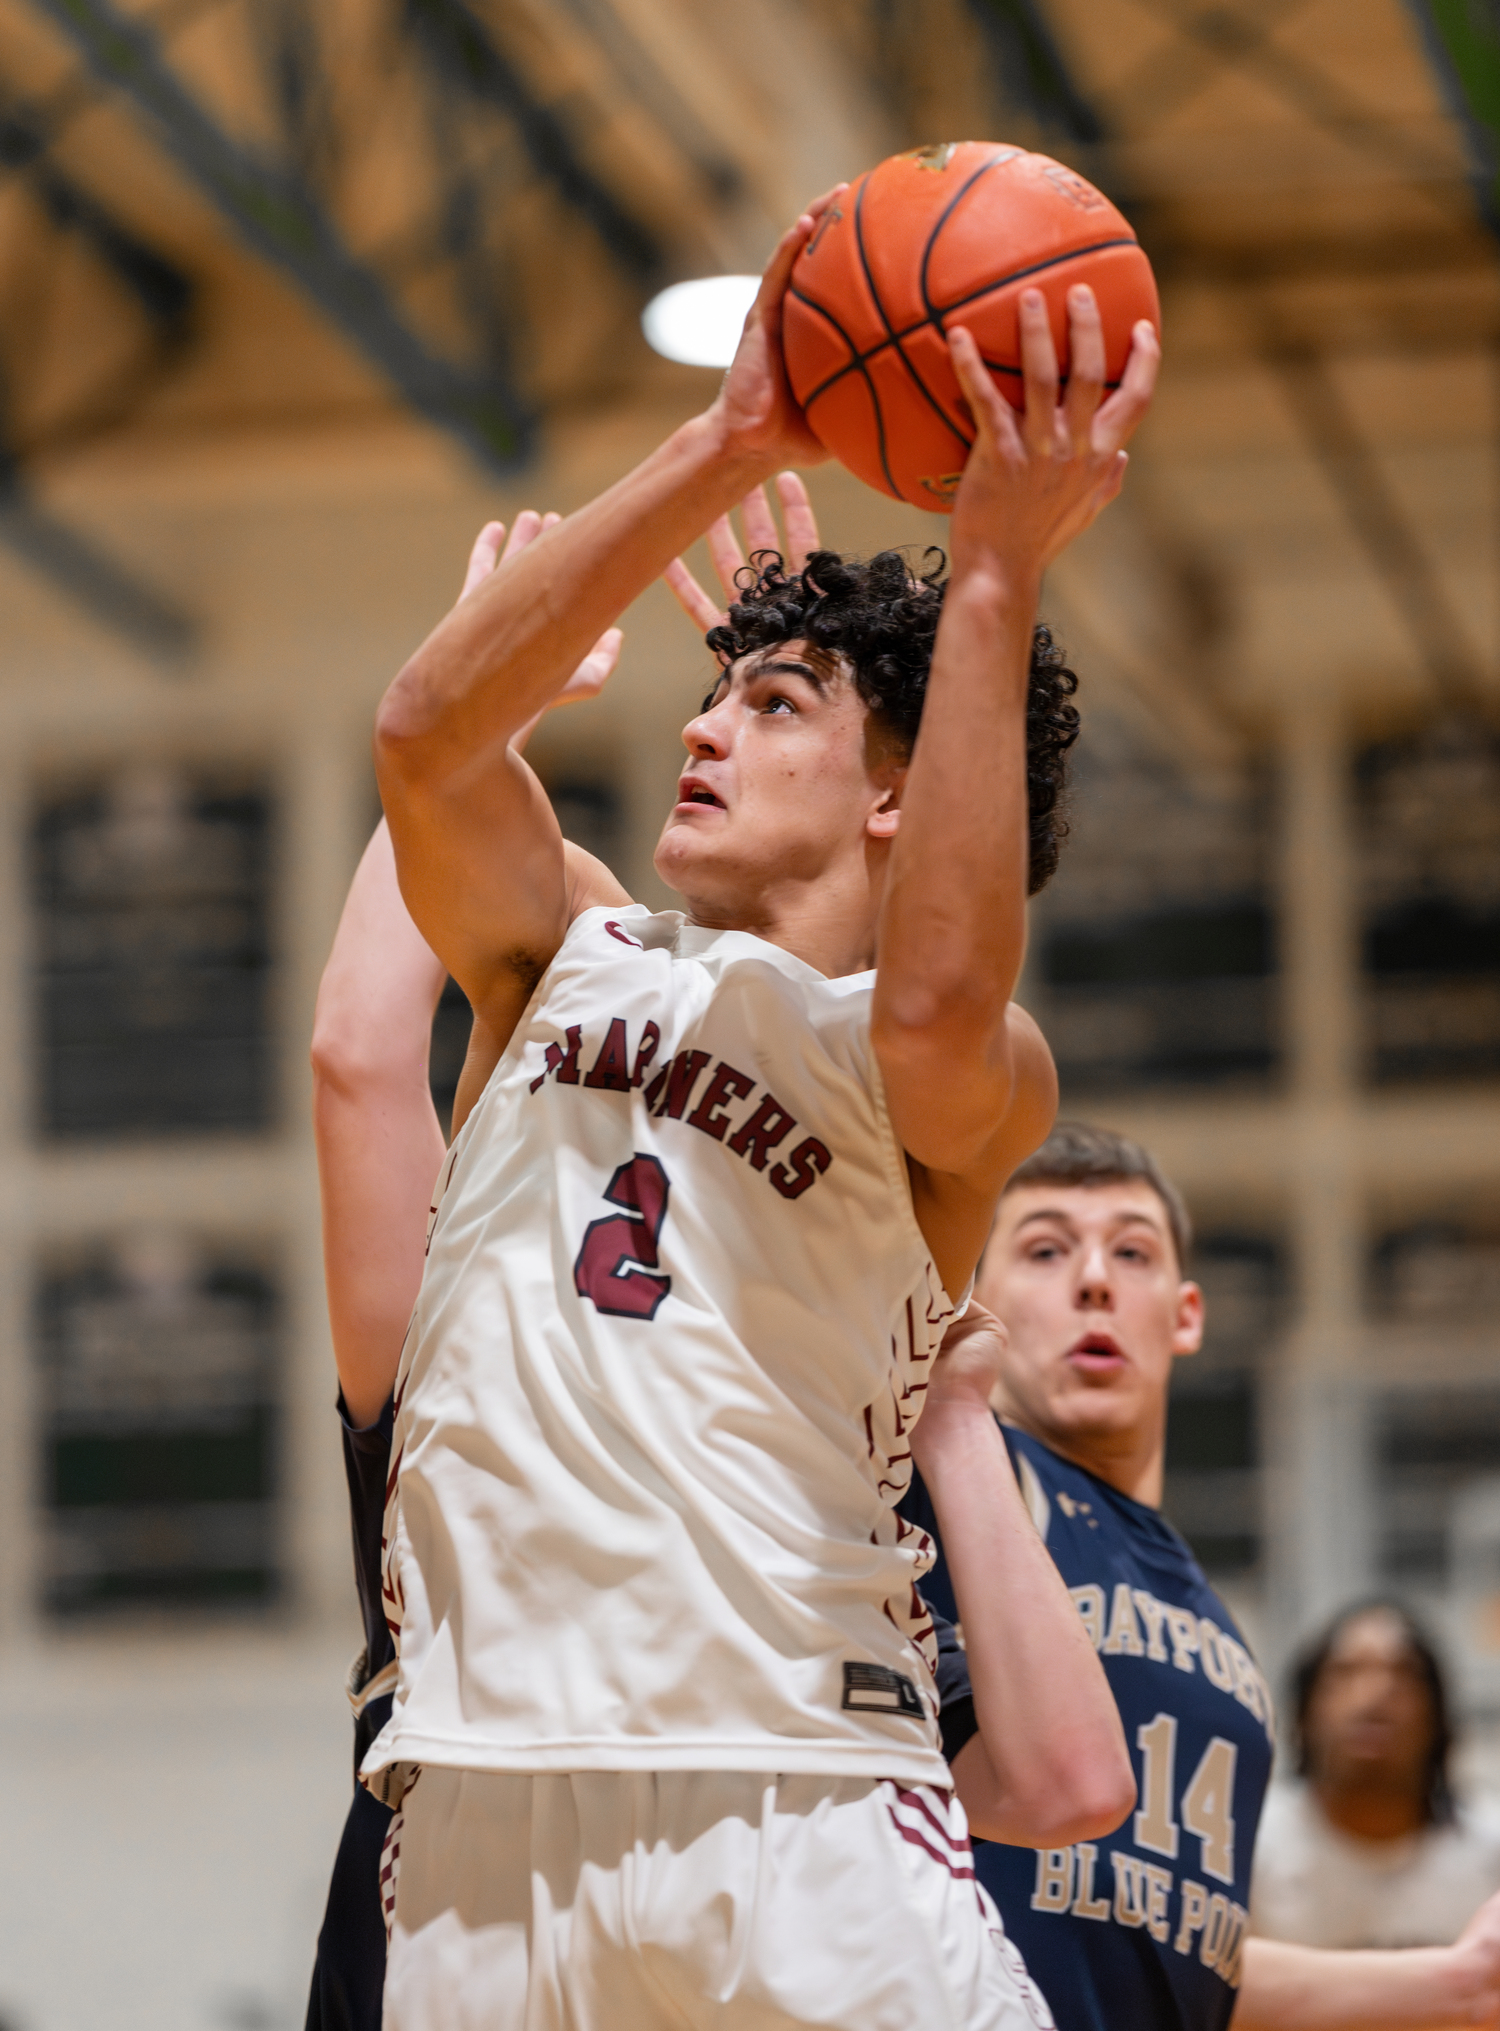 Southampton sophomore Alex Franklin scored 11 of his 17 points in the first quarter on Saturday en route to leading the Mariners to a 60-46 victory over Bayport-Blue Point to win the Suffolk County Class A Championship.   RON ESPOSITO